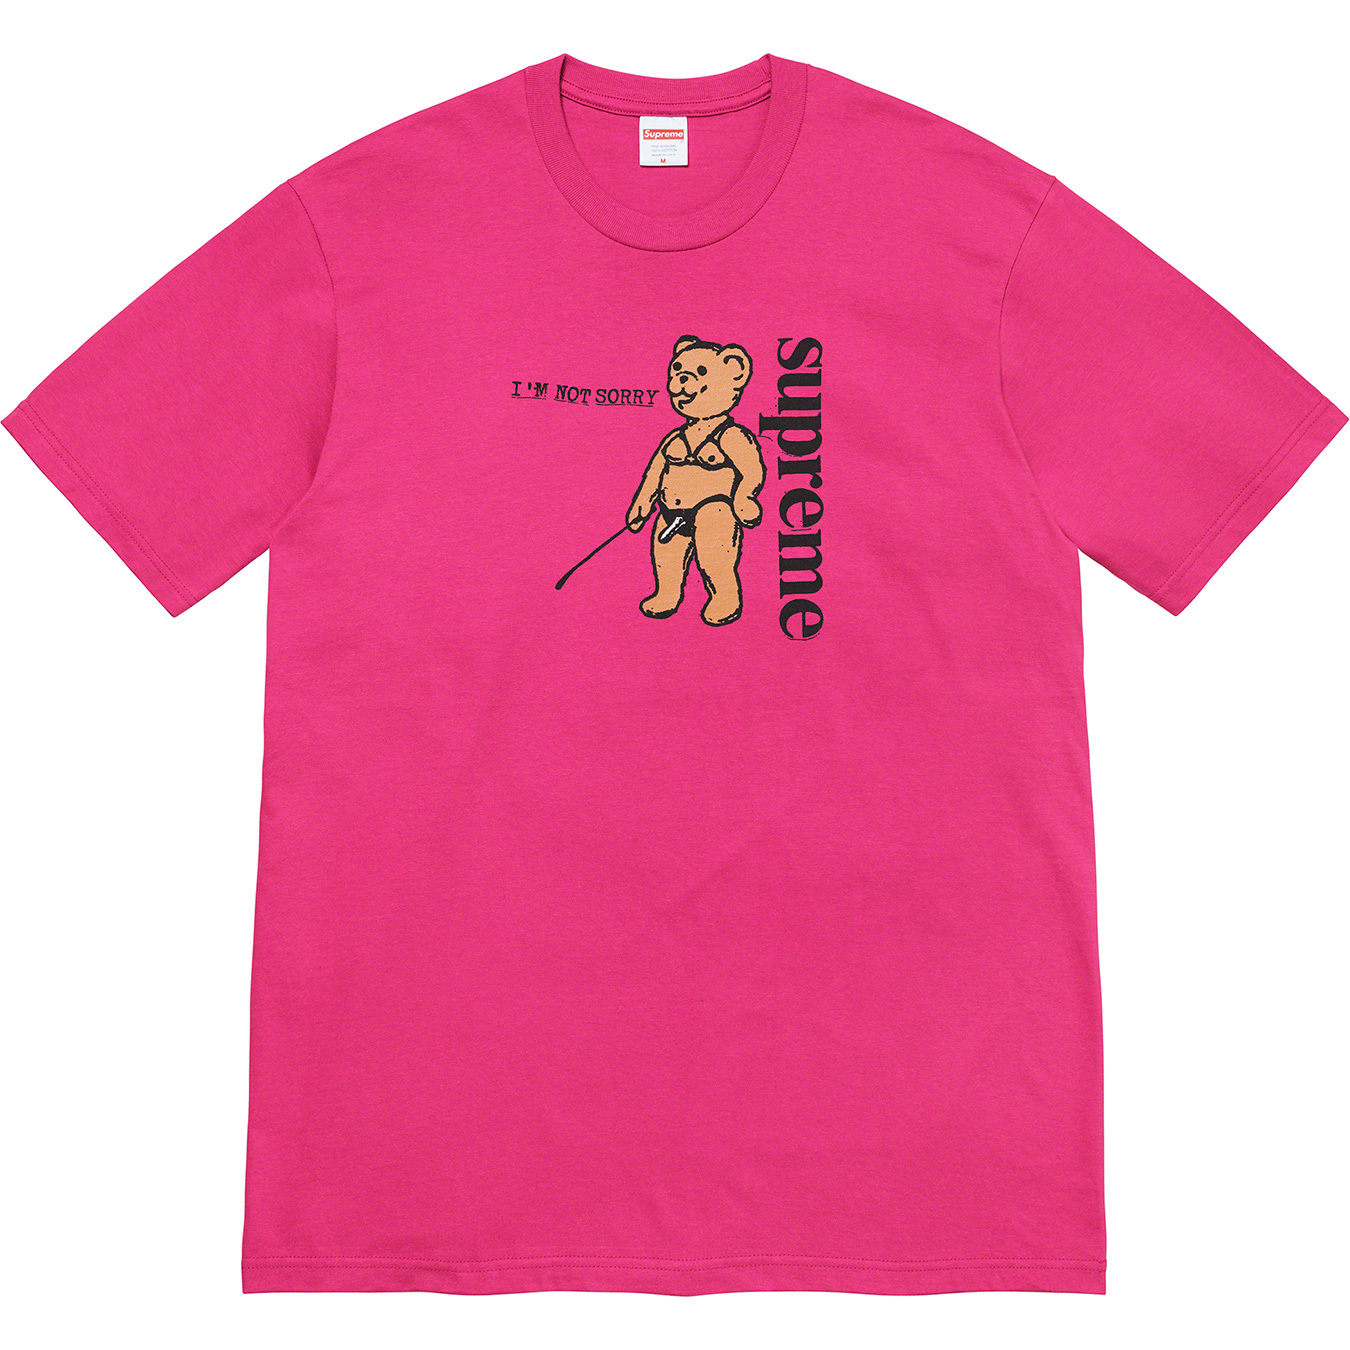 Not Sorry Tee   spring summer    Supreme